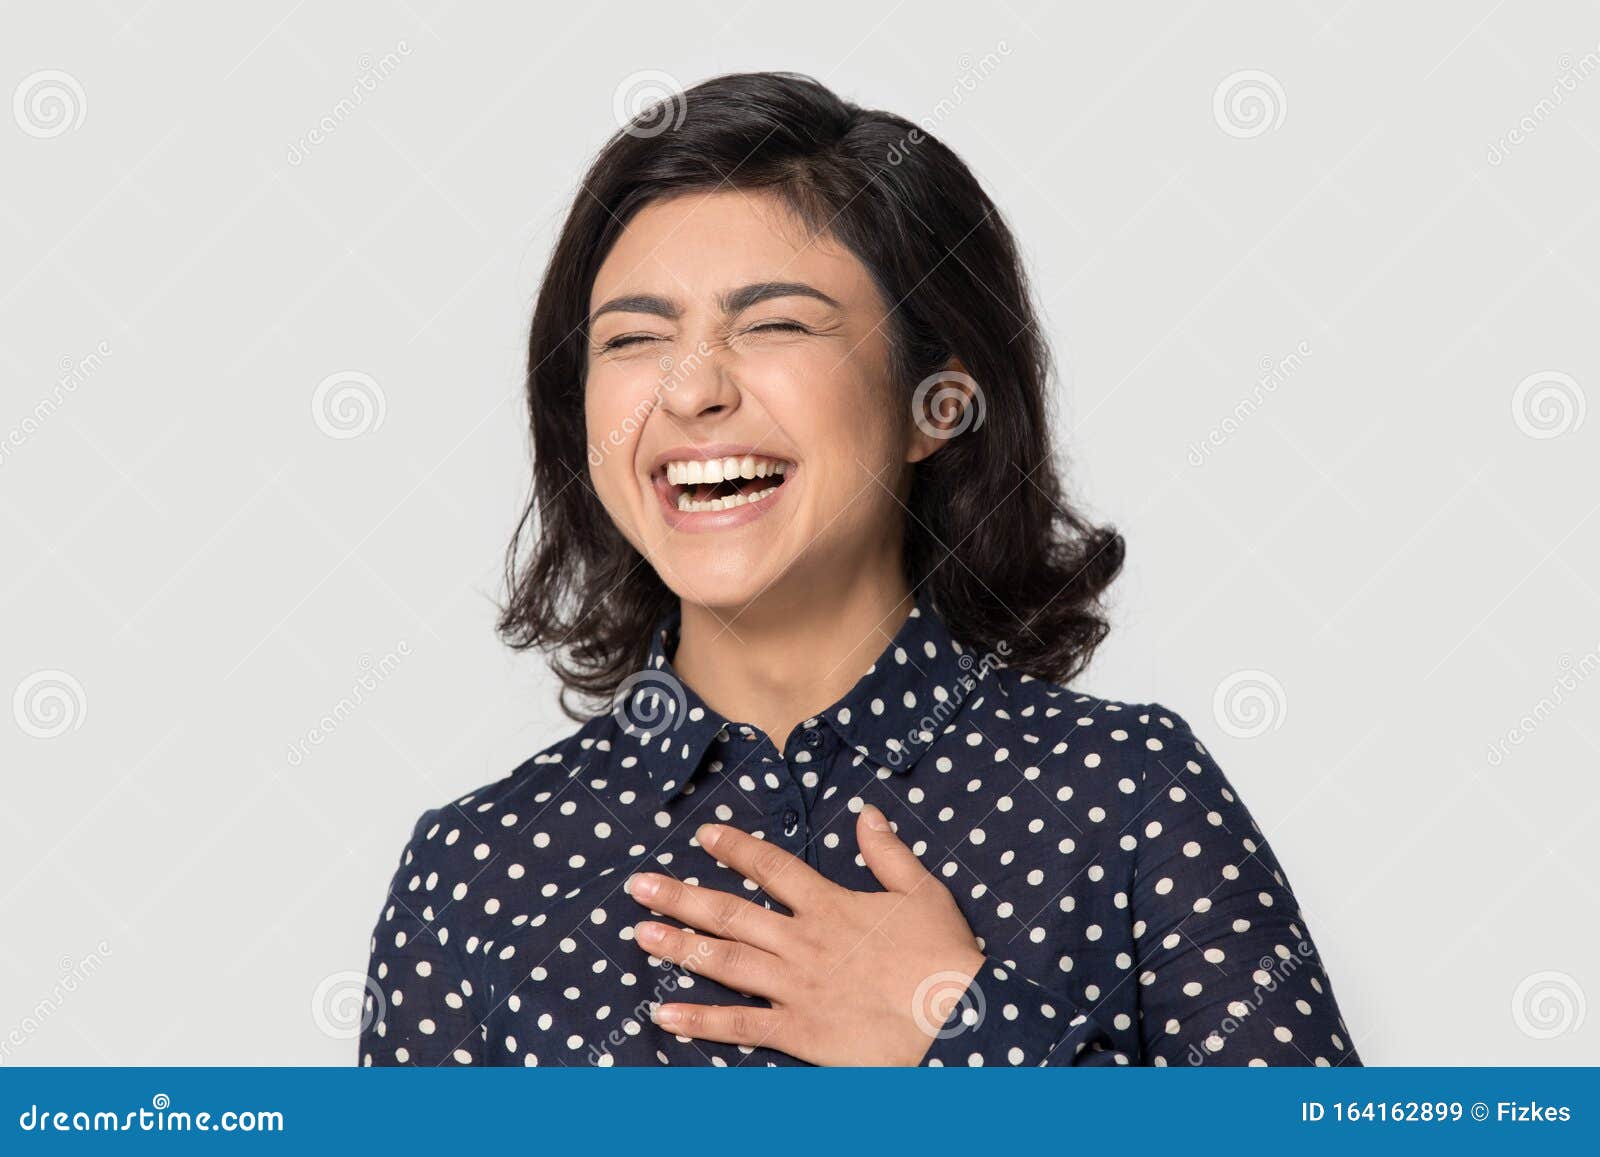 Excited Indian Woman with Healthy Smile Laughing, Having Fun Stock Image -  Image of enjoy, concept: 164162899